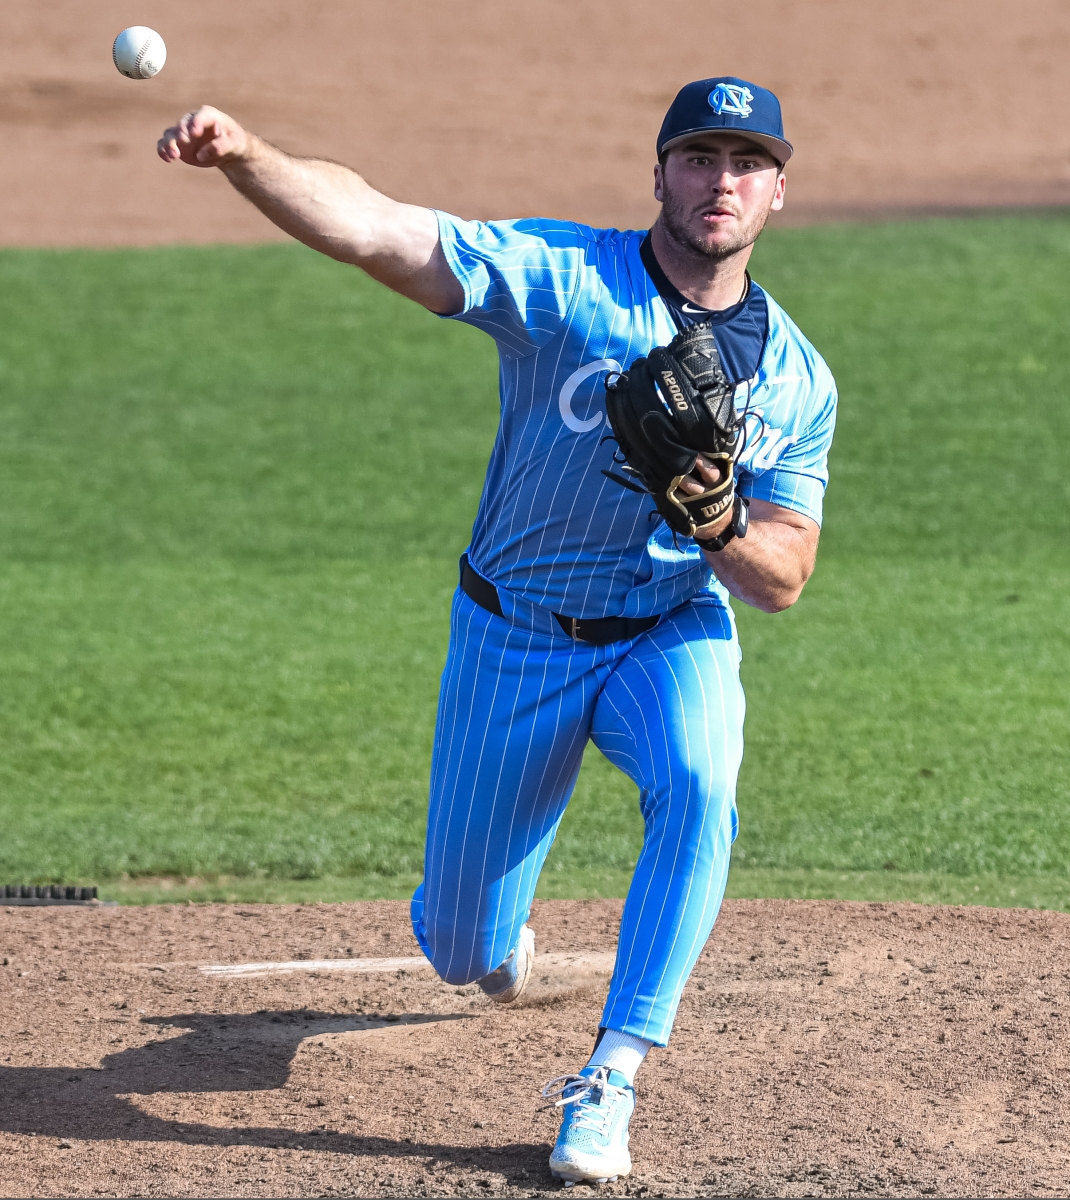 UNC first to clinch ACC baseball tournament berth but falls in Top 25